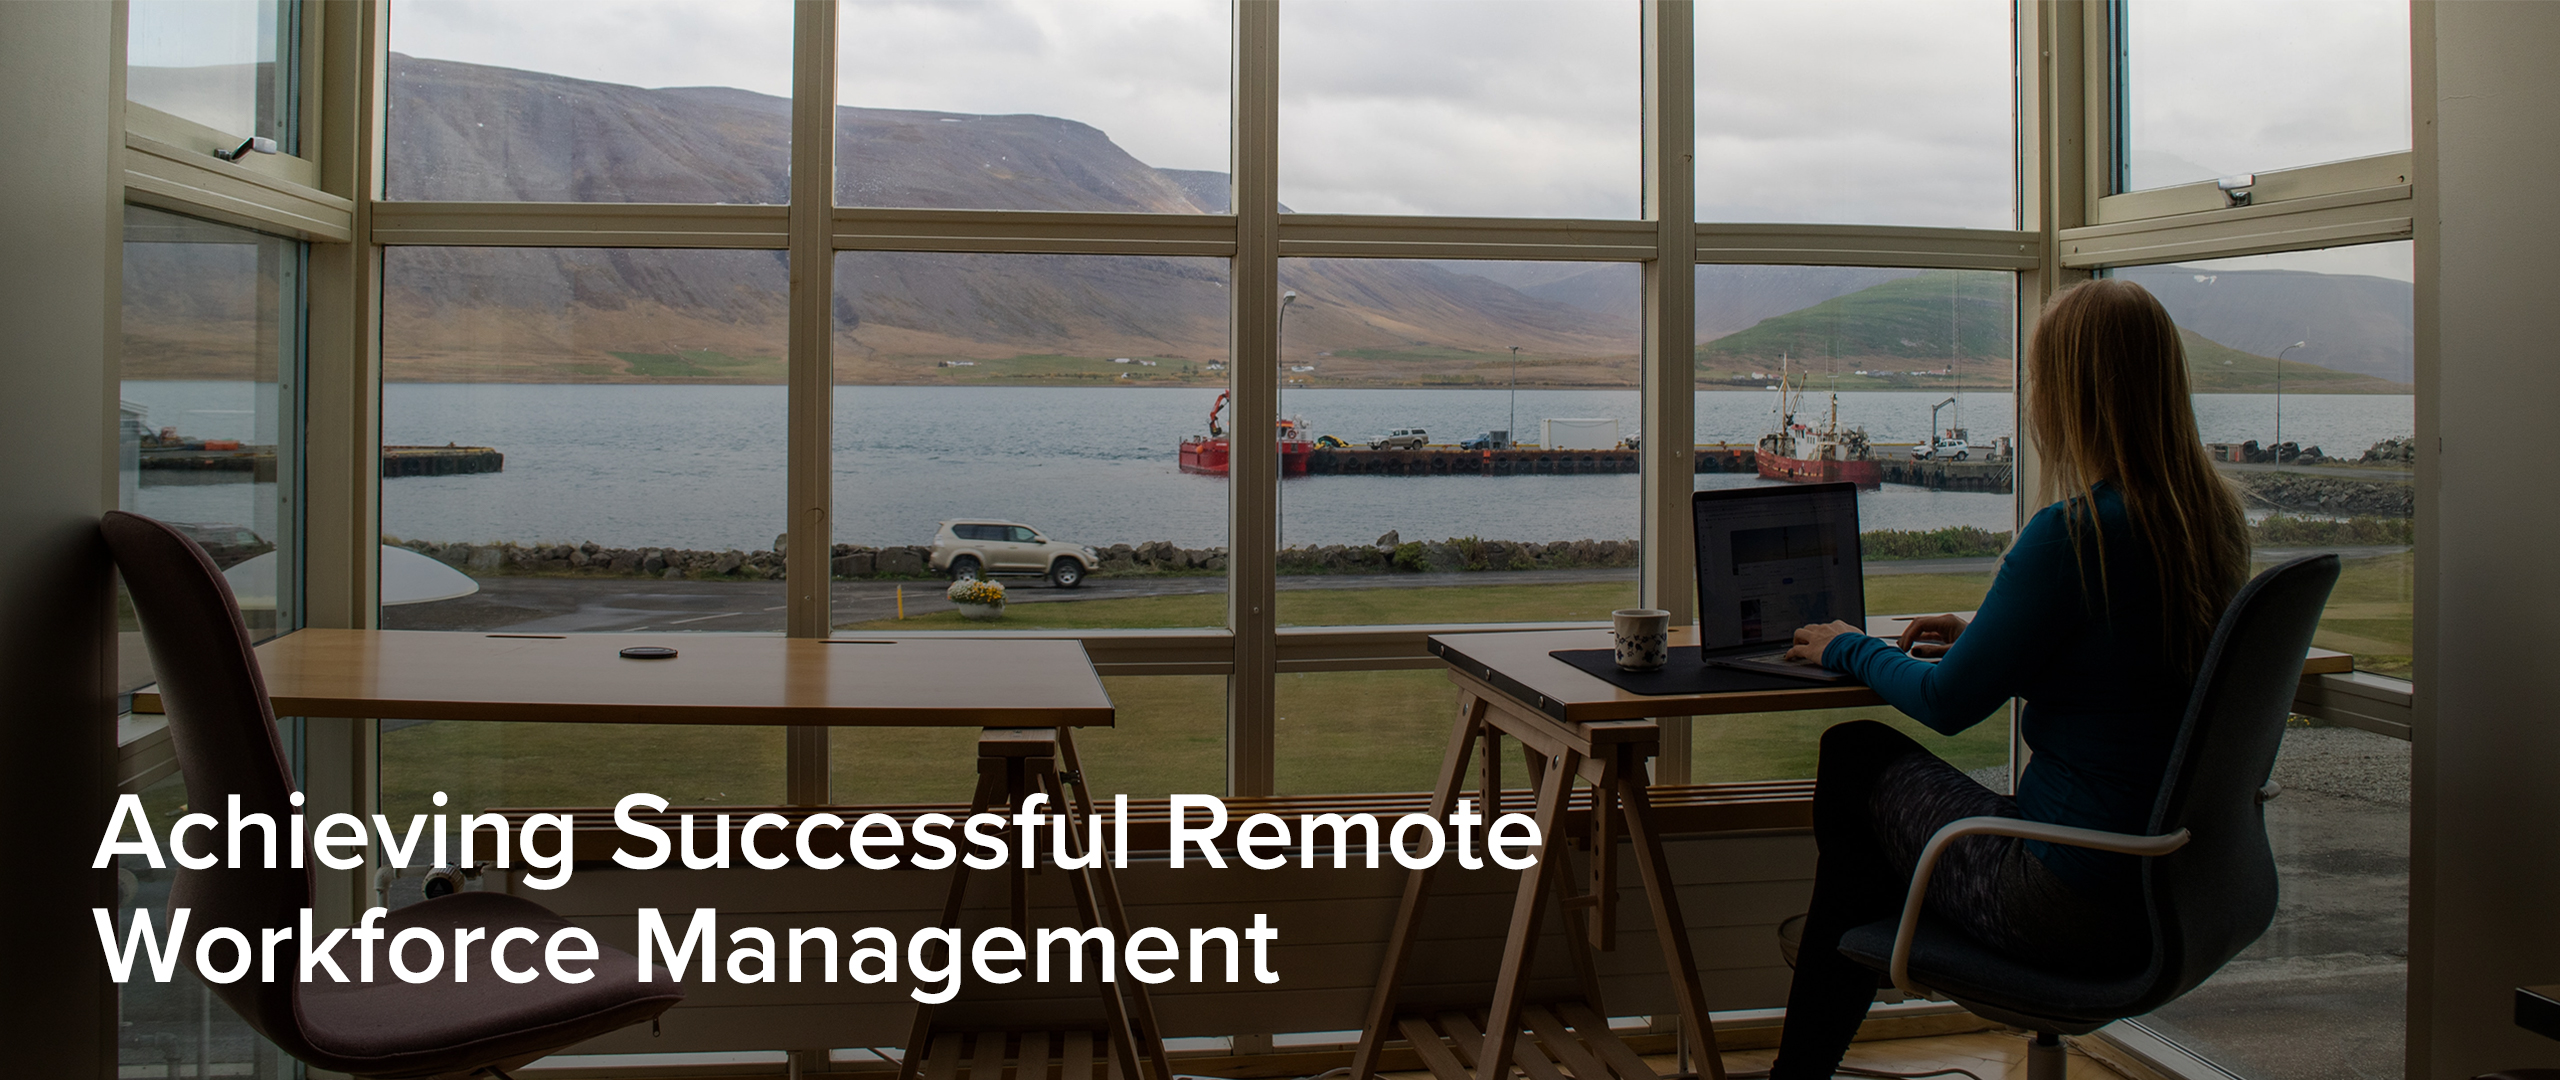 Reality of Managing a Remote Workforce